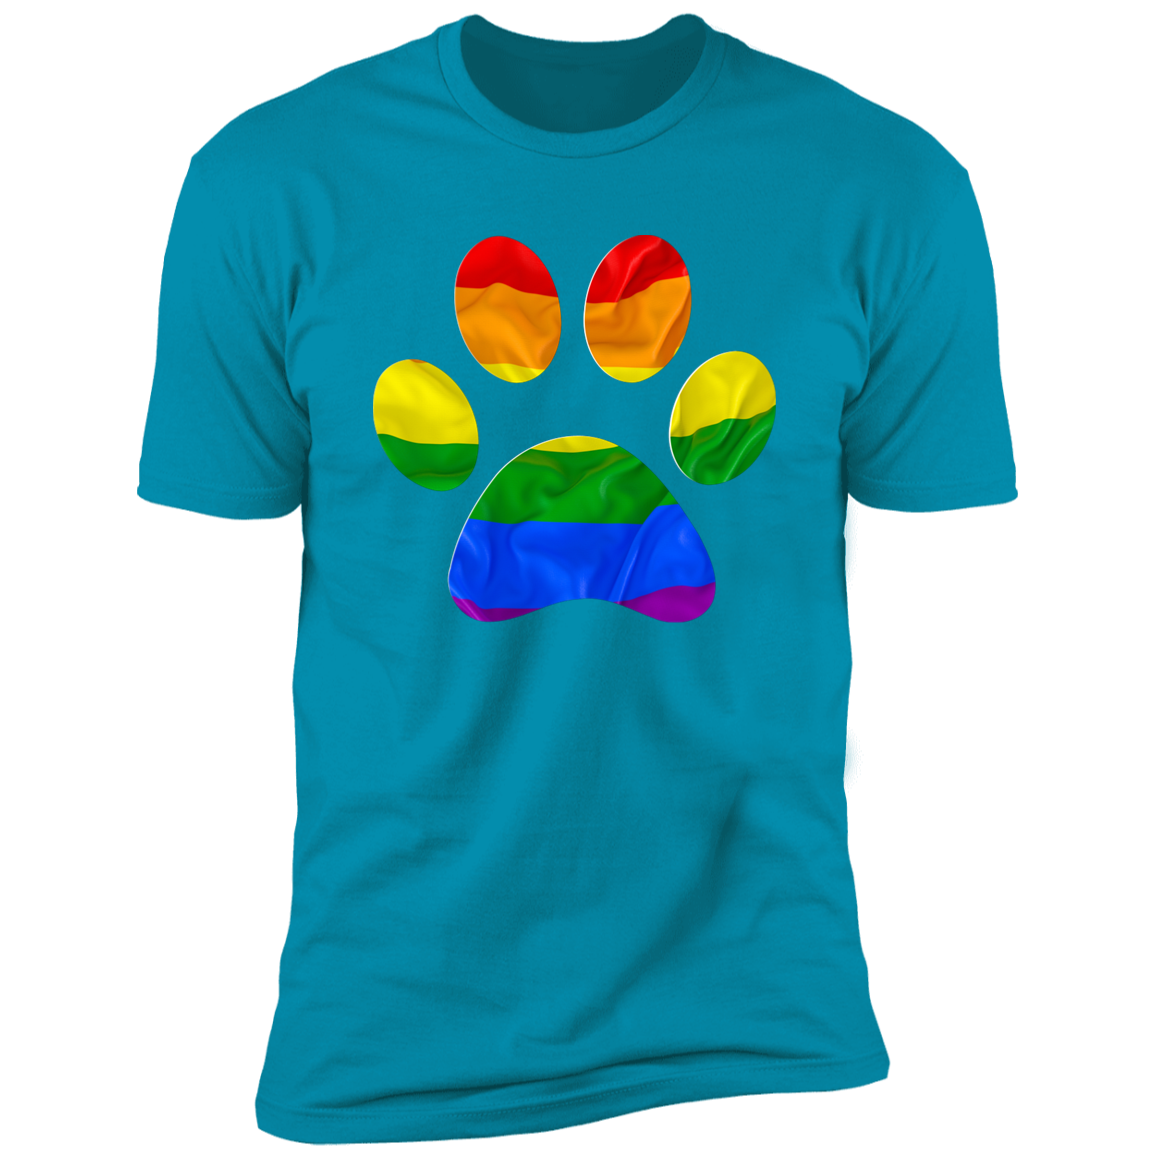 Pride Paw Pride T-shirt, Paw Pride Dog Shirt for humans, in Turquoise 